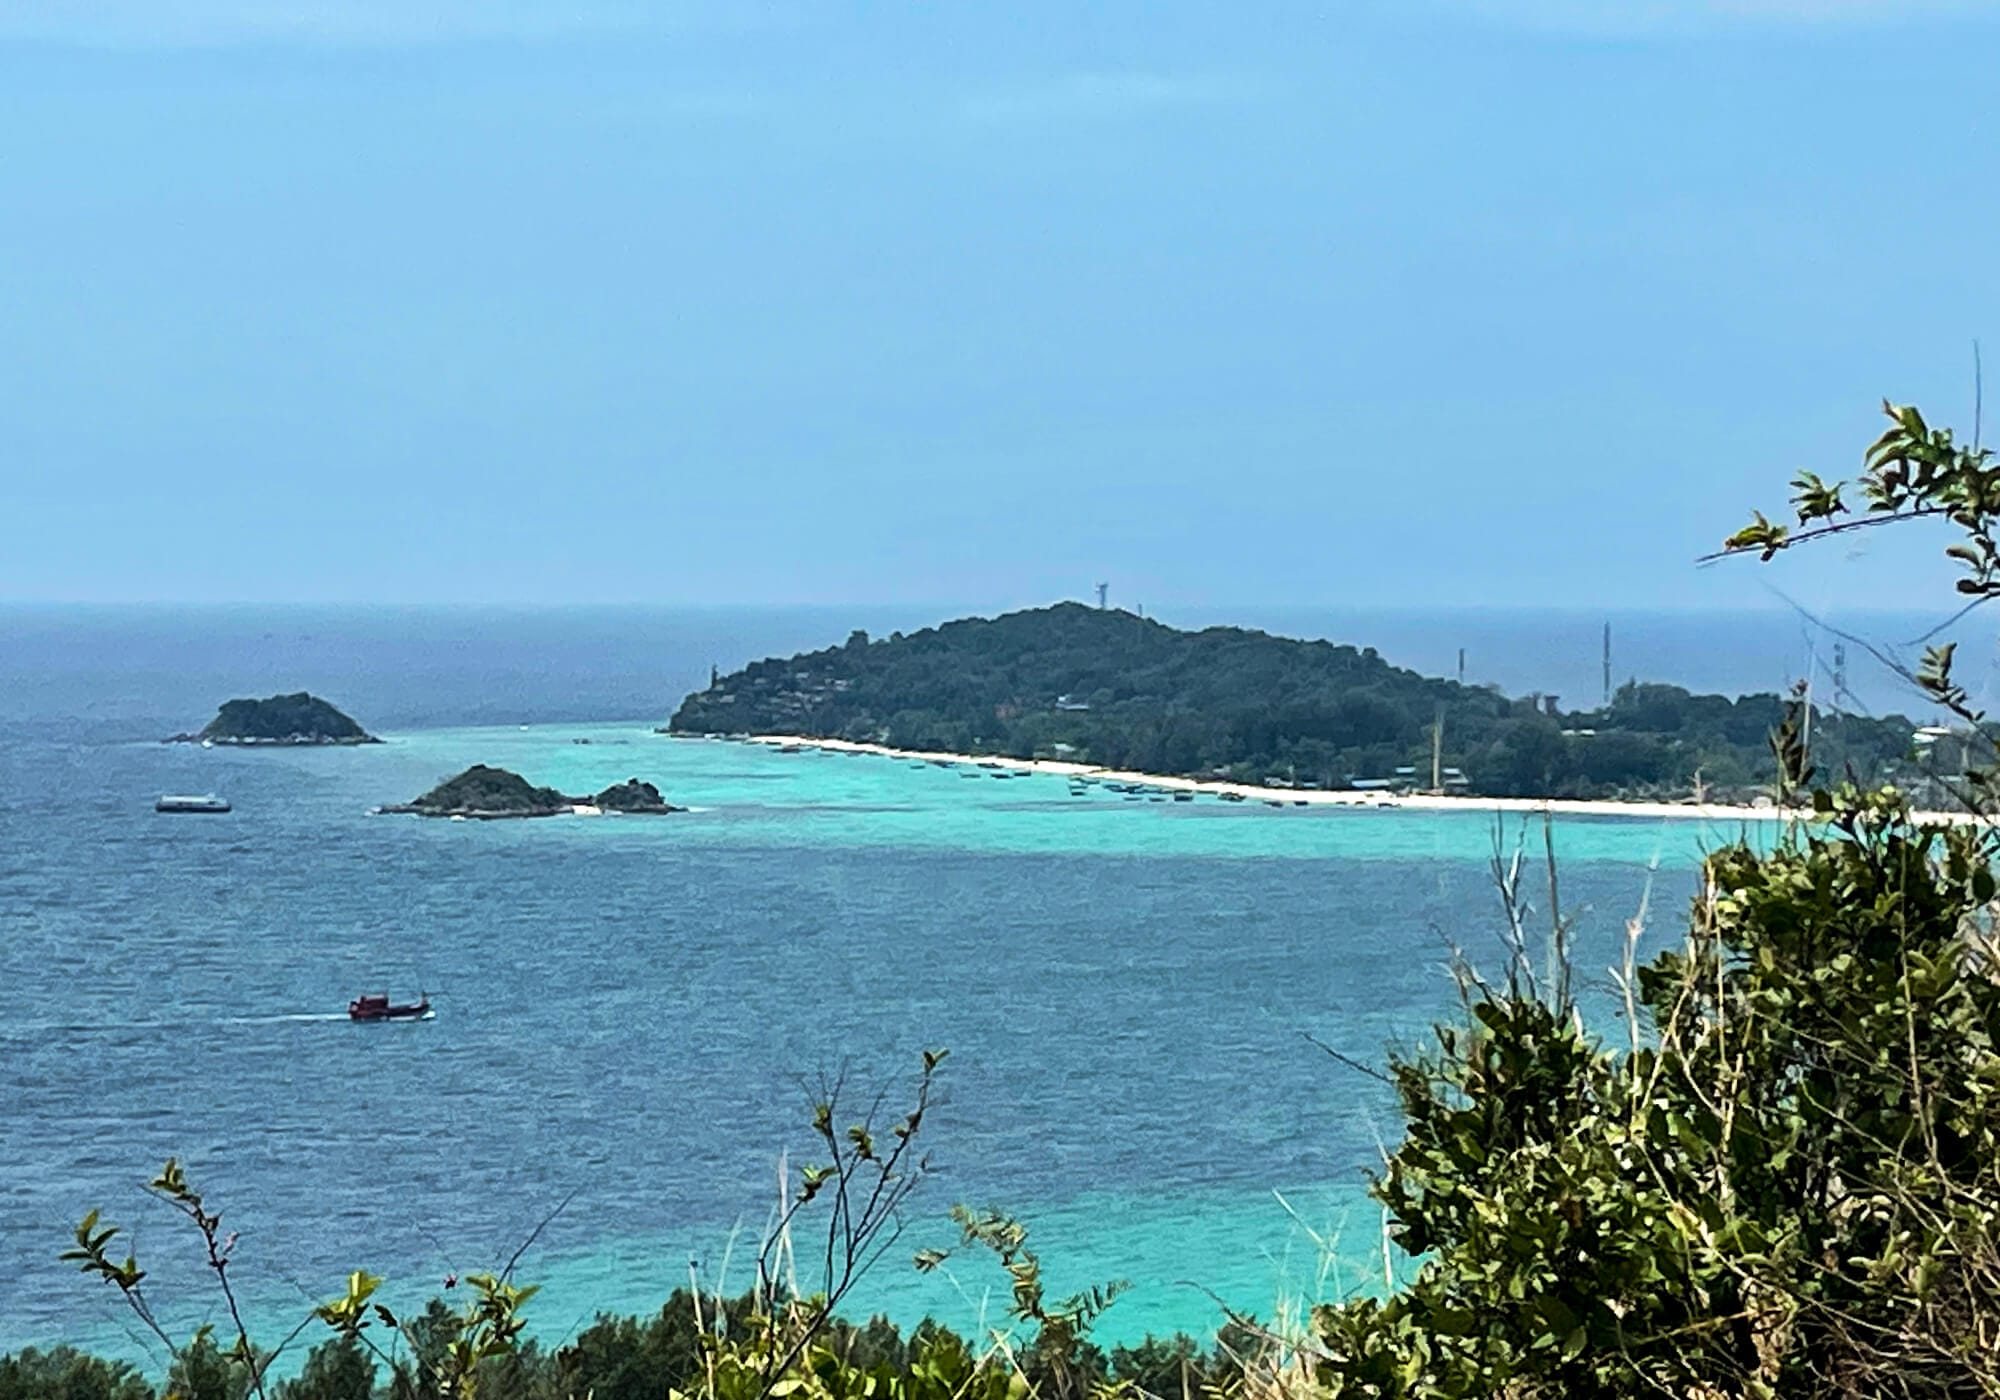 View of Koh Lipe, Koh Kra, and Koh Usen, Viewpoint One